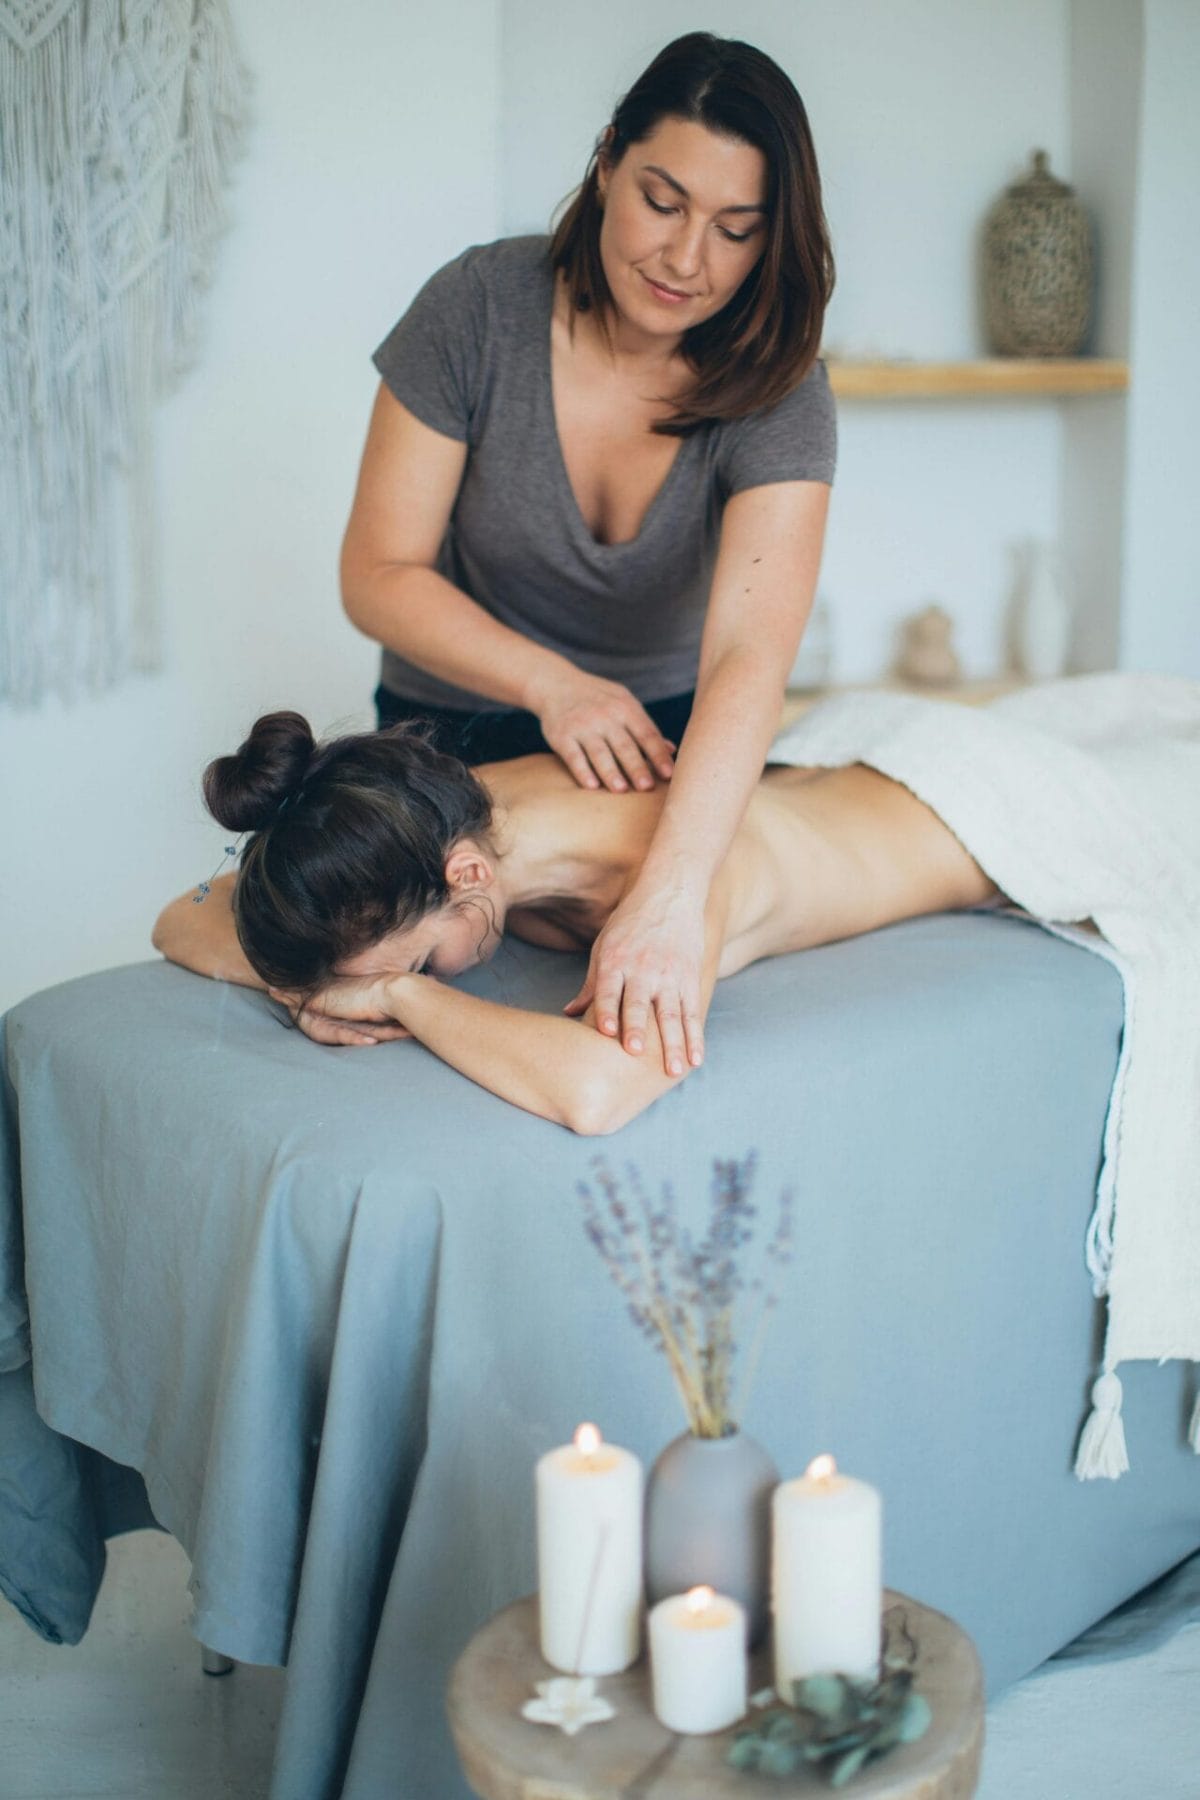 A woman receiving lymphatic drainage massage in a spa.